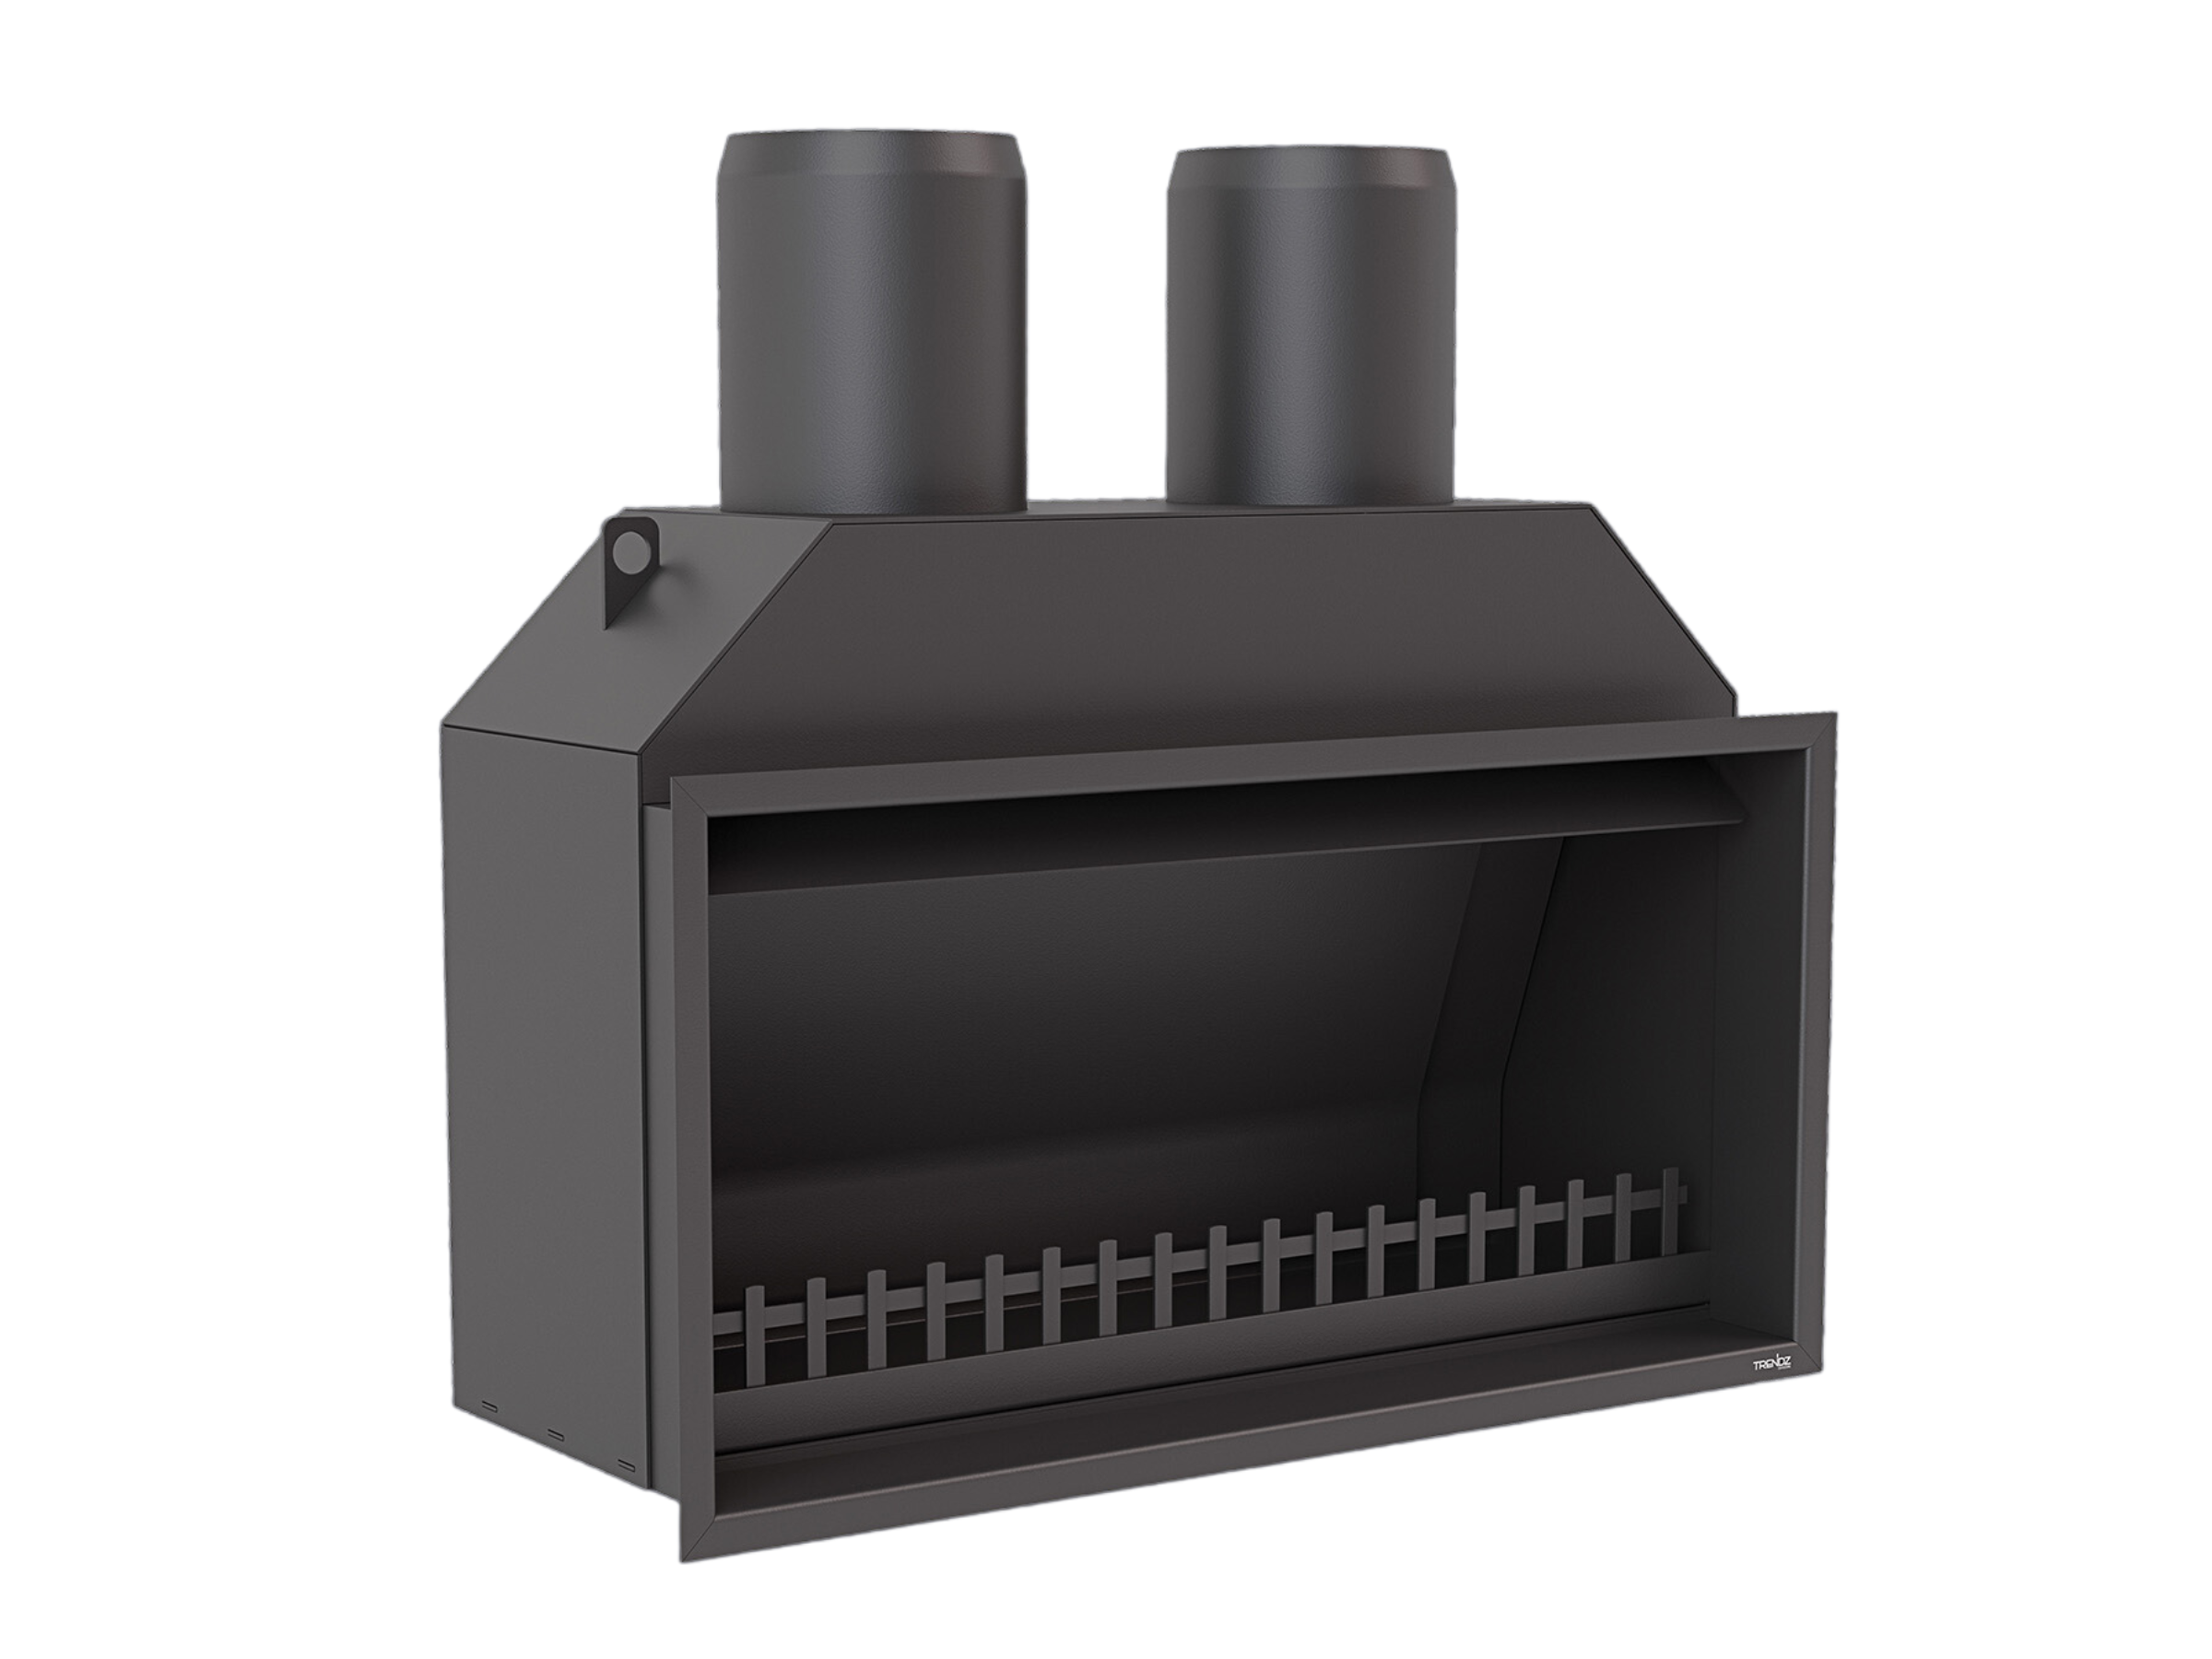 T1600 firebox with two chimneys